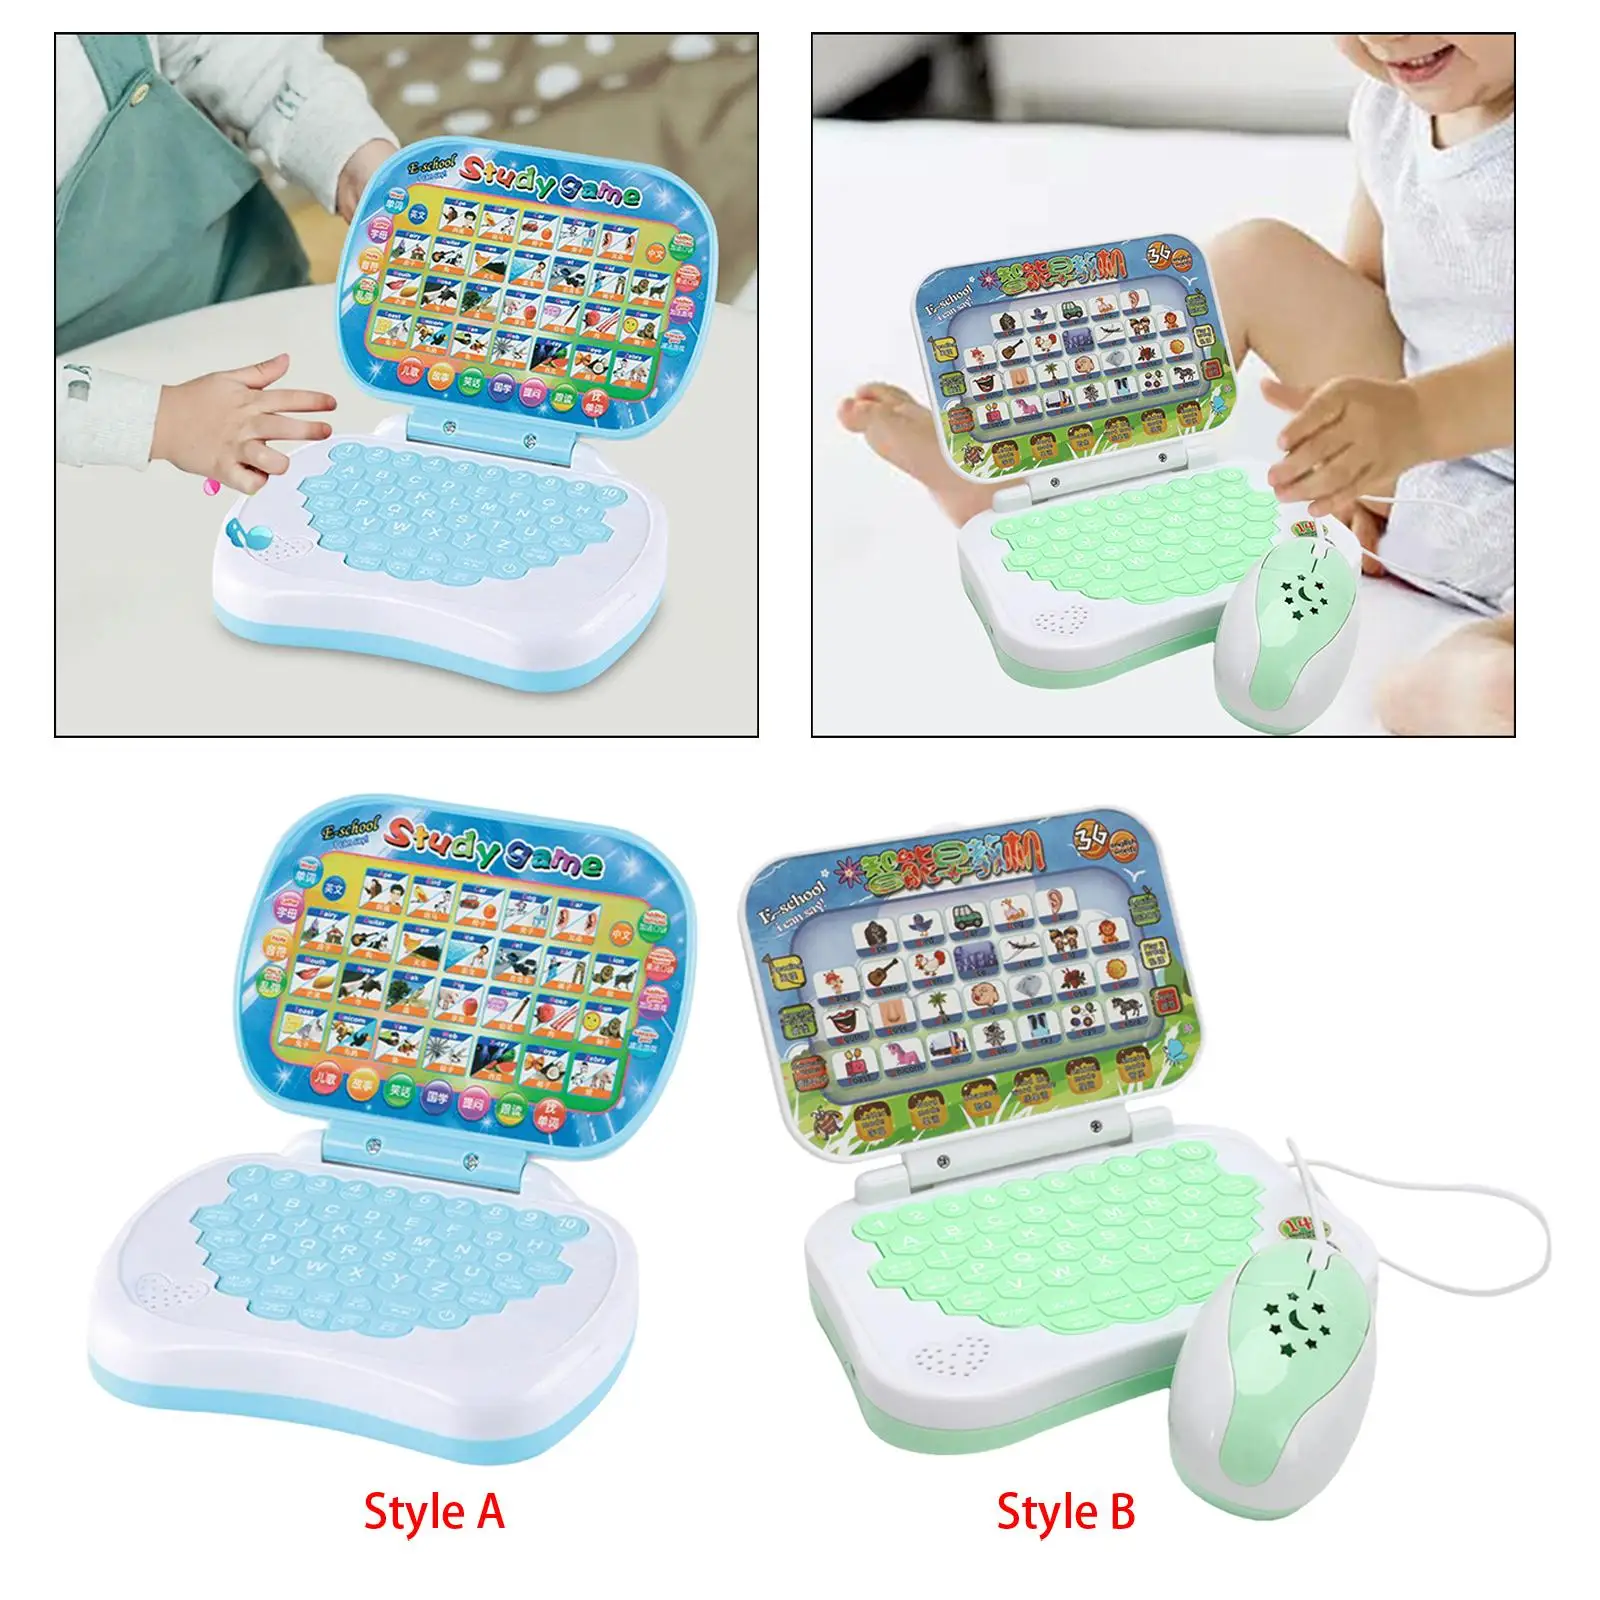 Multifunction Learning Machine English Early Education Toy Child Interactive Learning Pad Tablet for Toddler Kids Bithday Gifts